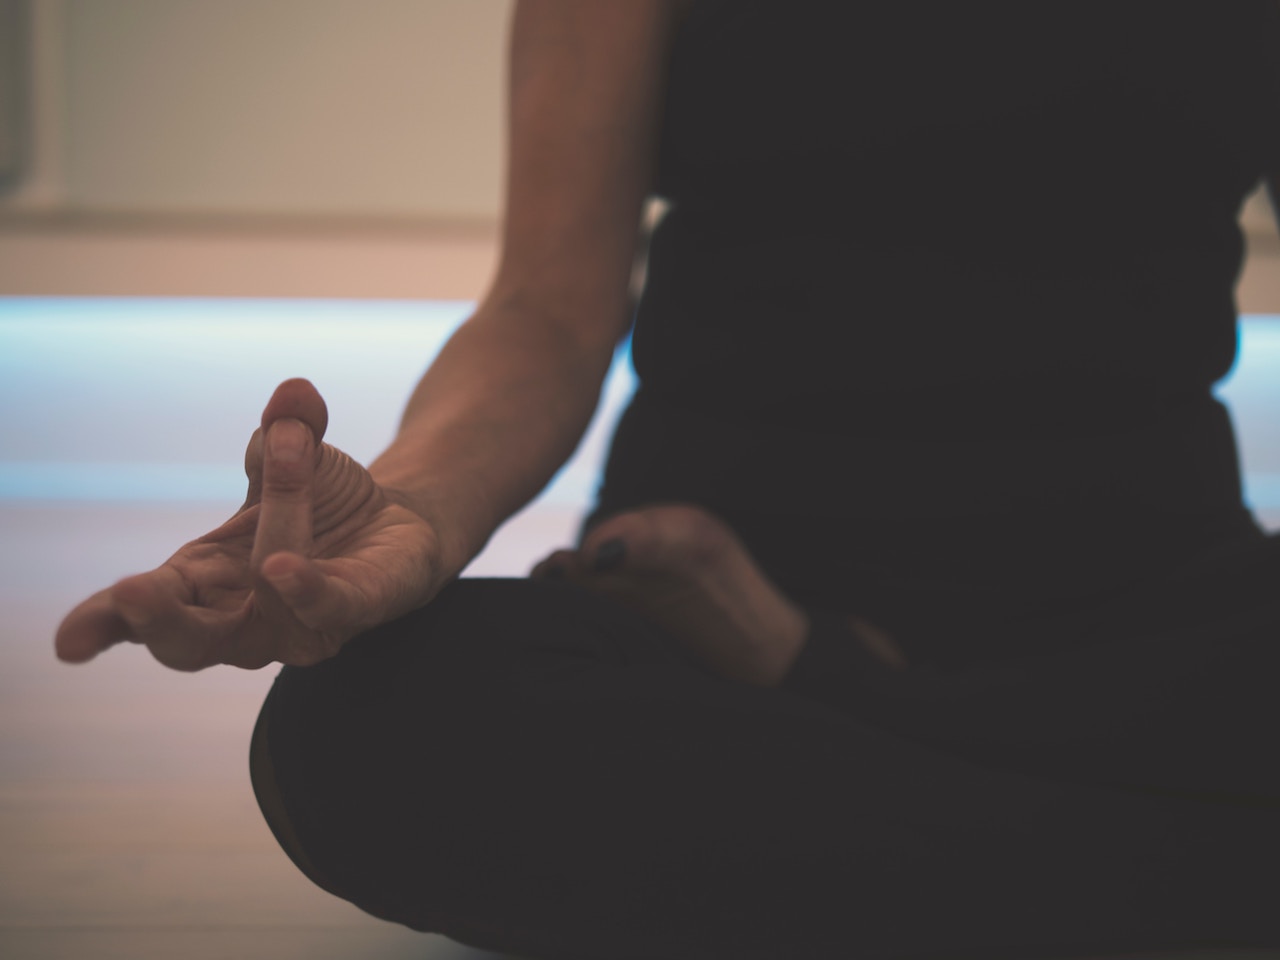 Yoga reduces stress and anxiety